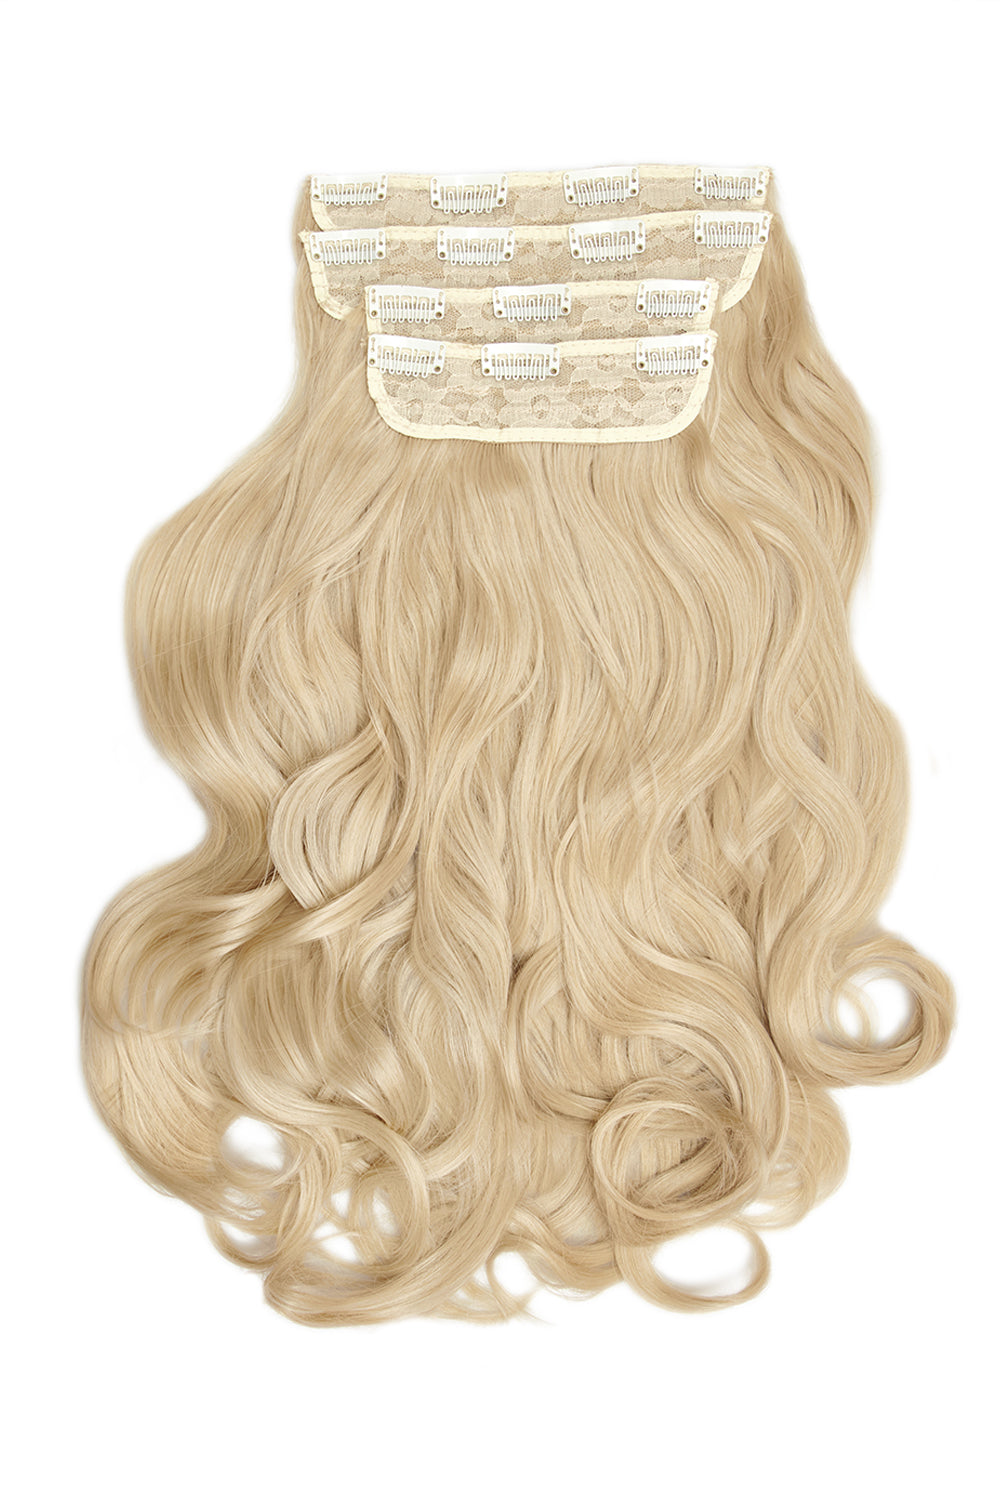 Ultimate Half Up Half Down 22’’ Curly Extension and Pony Set - California Blonde